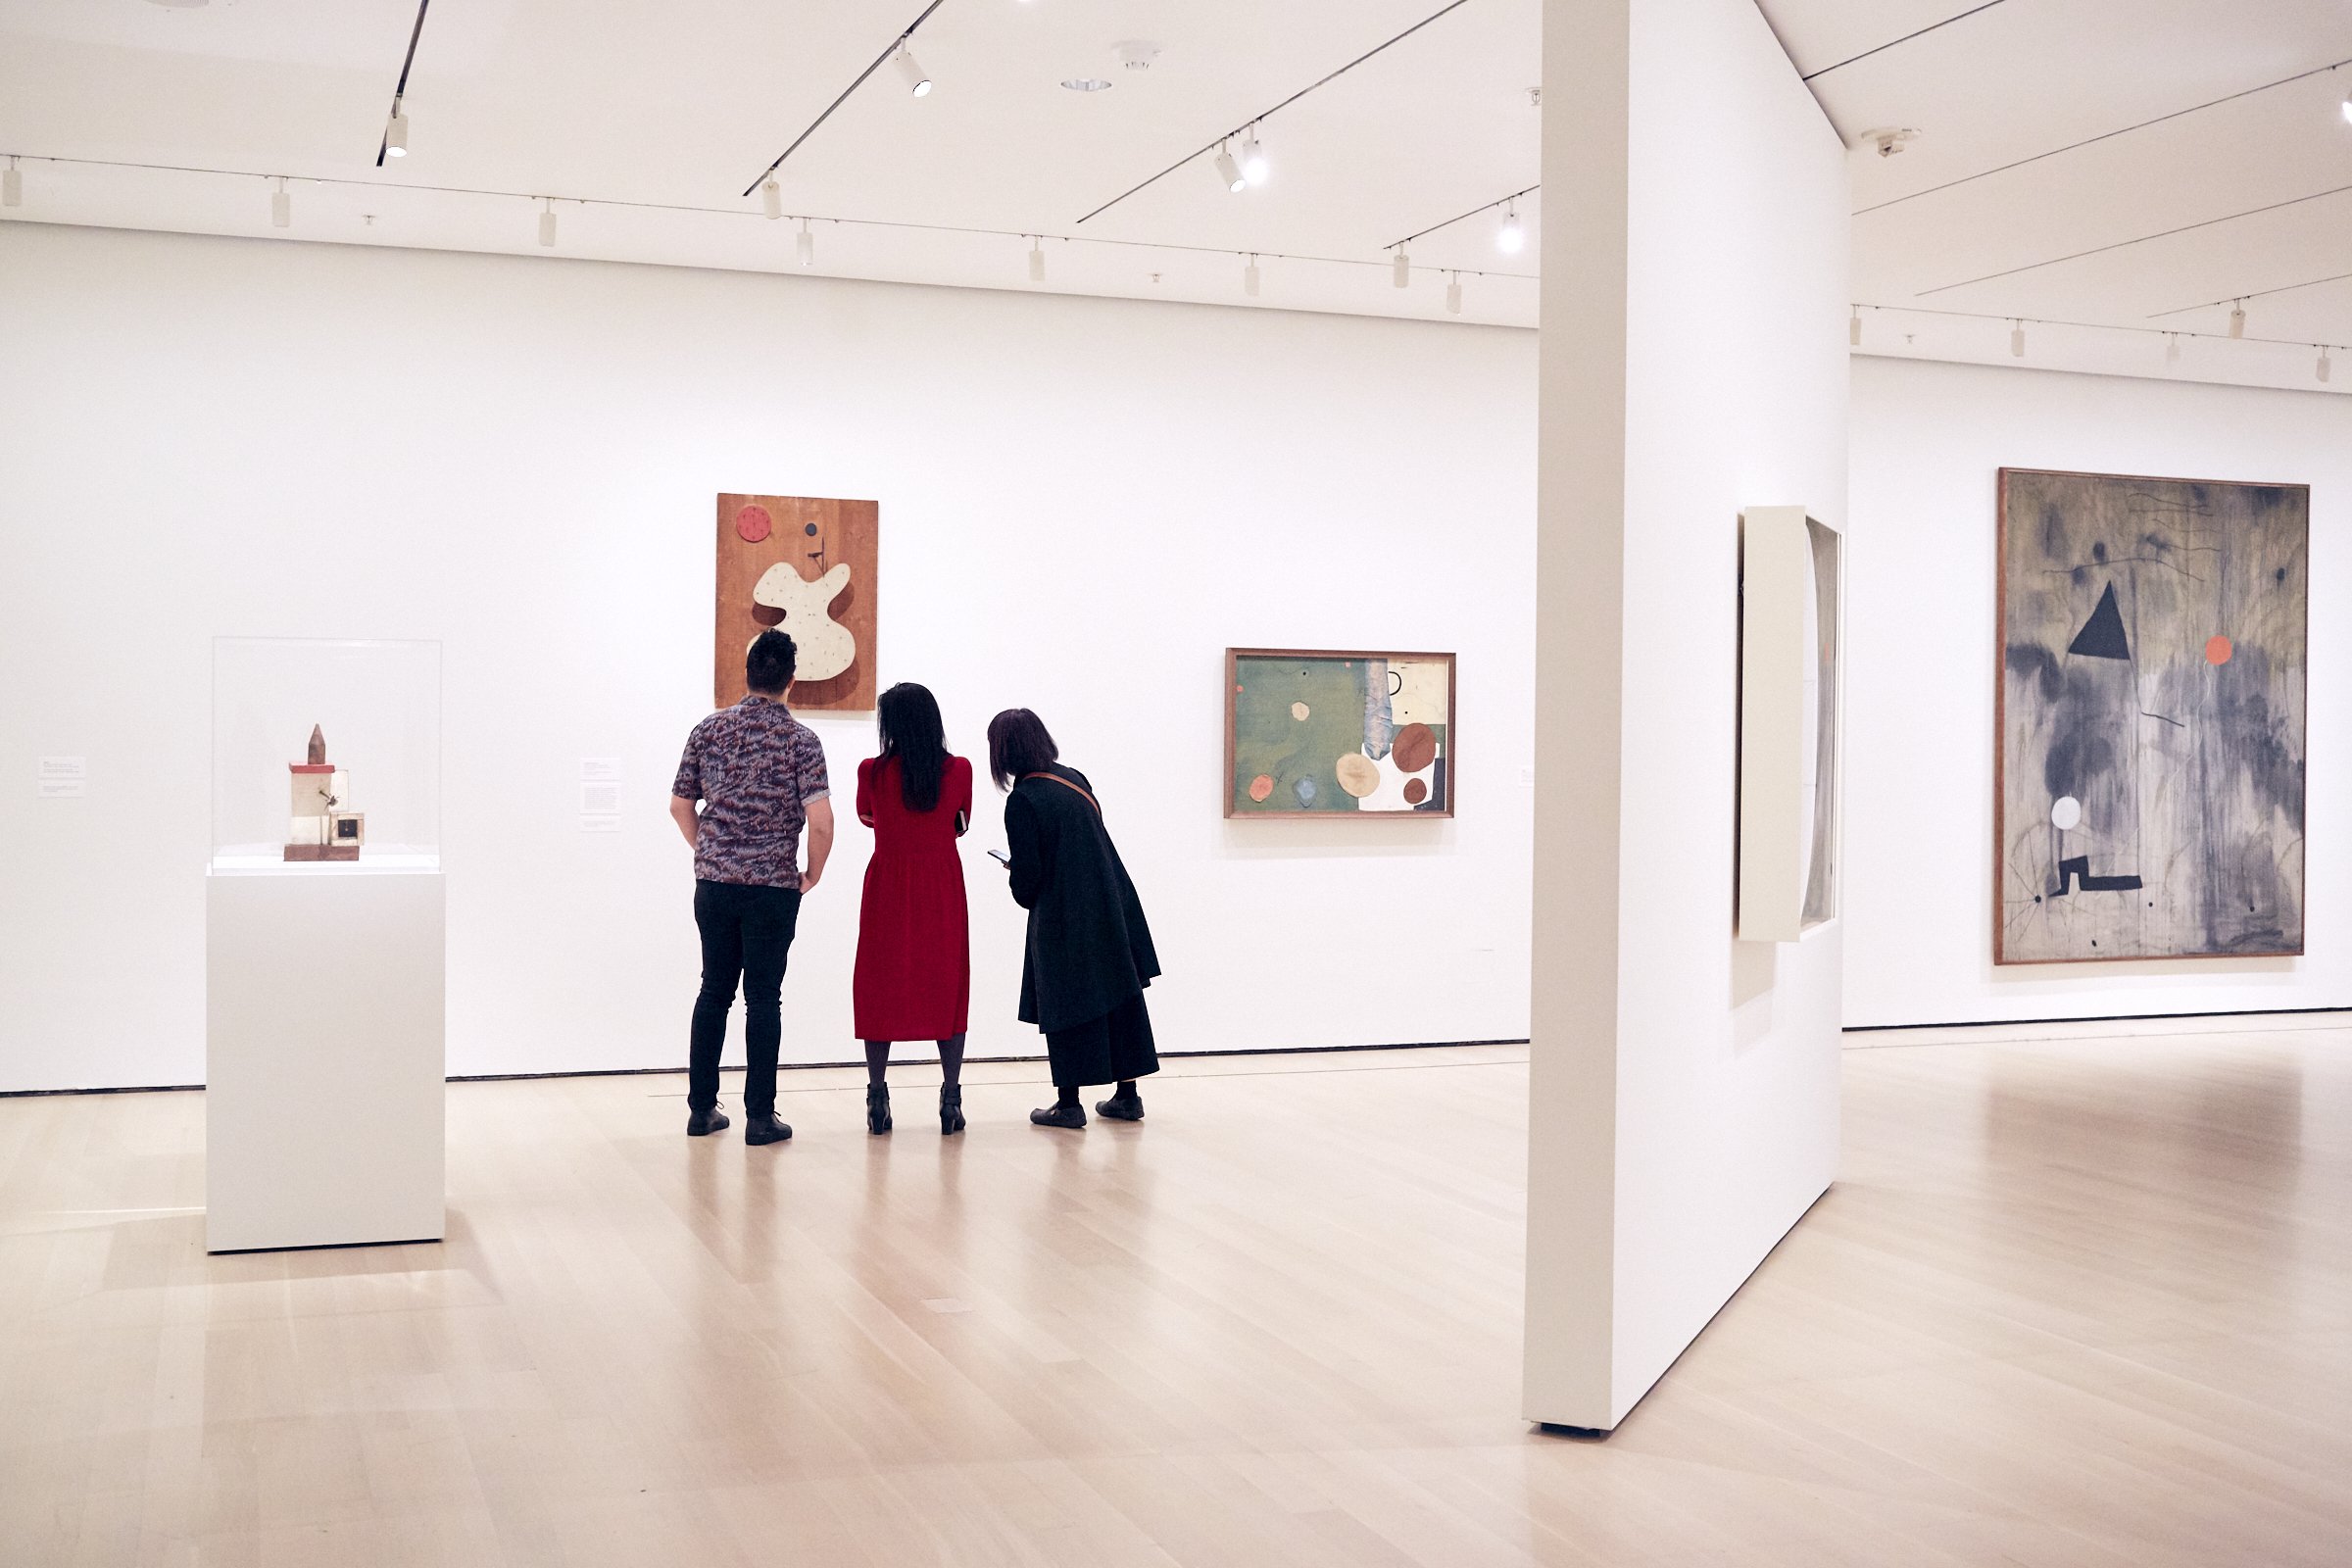 MoMA The Museum of Modern Art on Twitter: "See it all as a the galleries after the Museum has closed to the public during Member After Hours on Wednesday, 8,